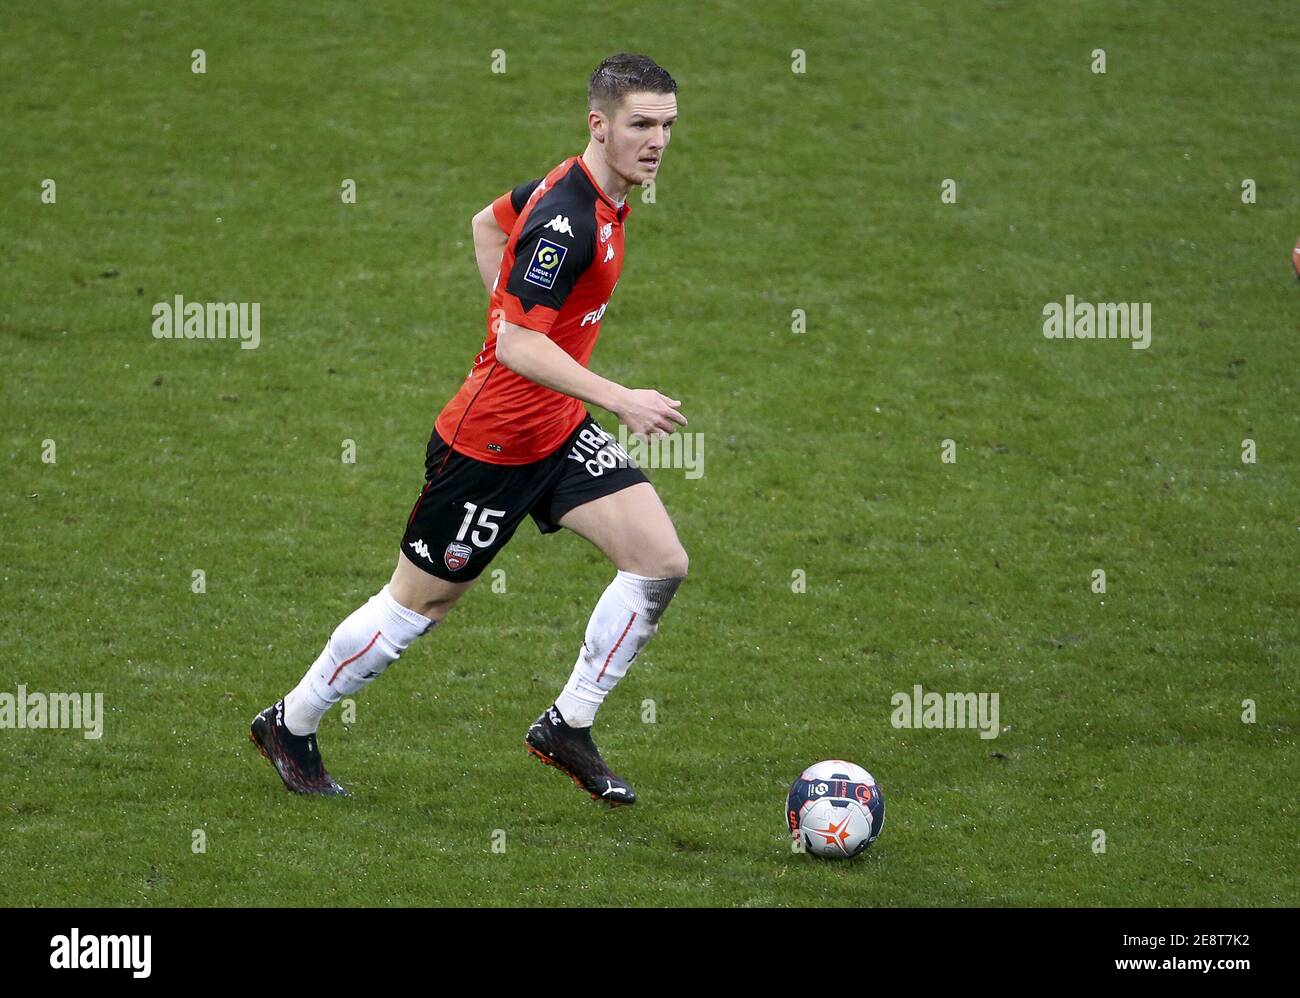 Julien Laporte of Lorient during the French championship Ligue 1 football  match between FC Lorient and Paris Saint-Germain on January 31, 2021 at  Stade du Moustoir - Yves Allainmat in Lorient, France -